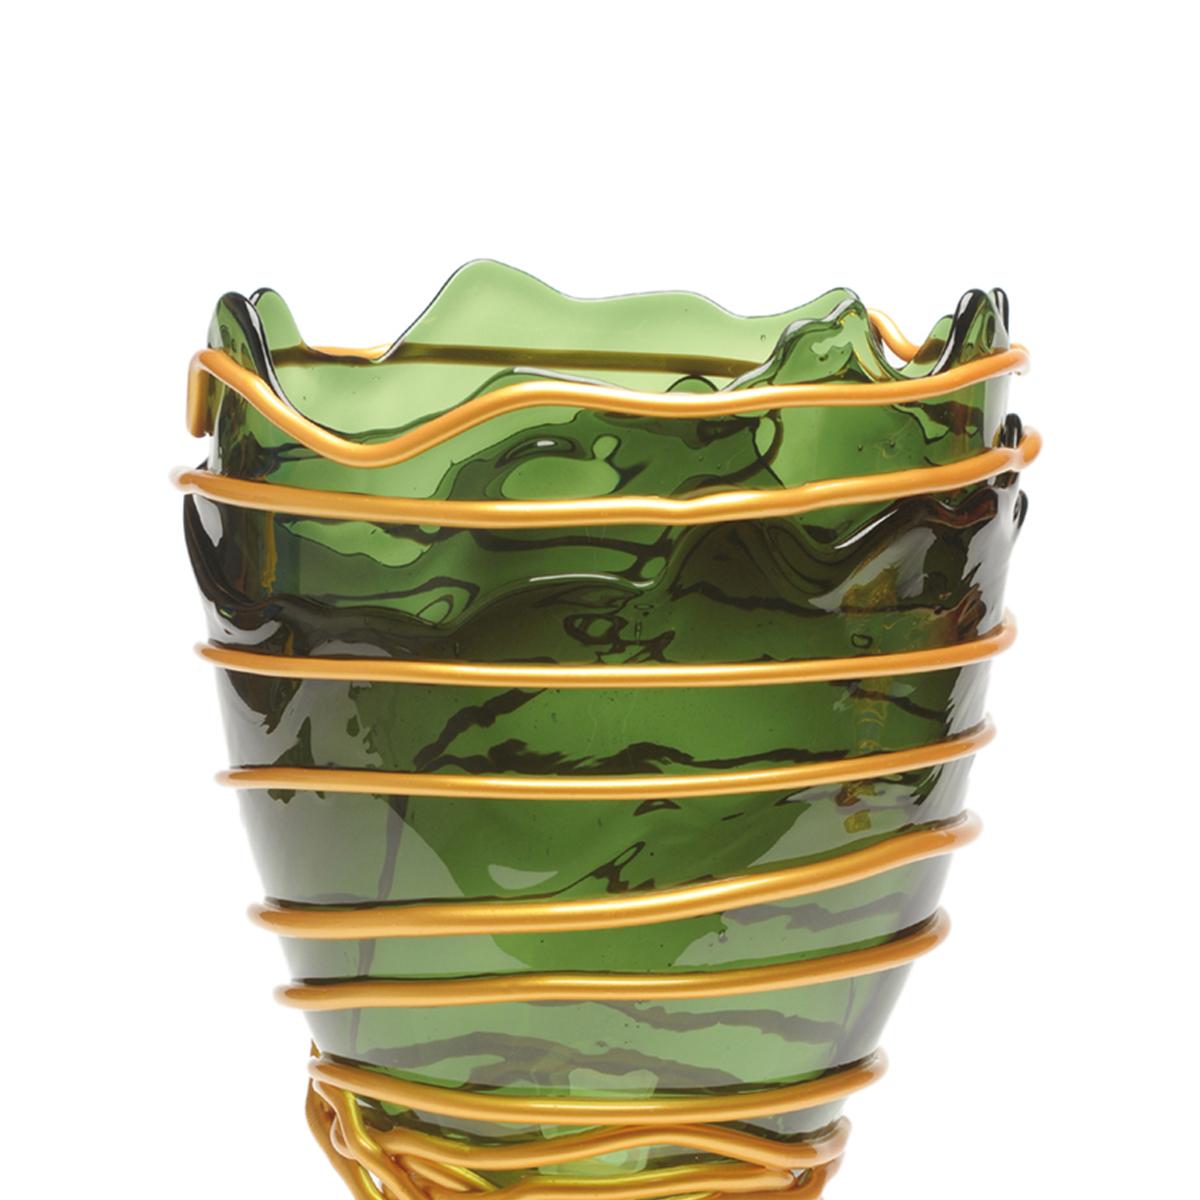 Pompitu II vase, green and gold.

Vase in soft resin designed by Gaetano Pesce in 1995 for Fish Design collection.

Measures: XL - ø 30cm x H 56cm

Other sizes available

Colours: green and gold.
Vase in soft resin designed by Gaetano Pesce